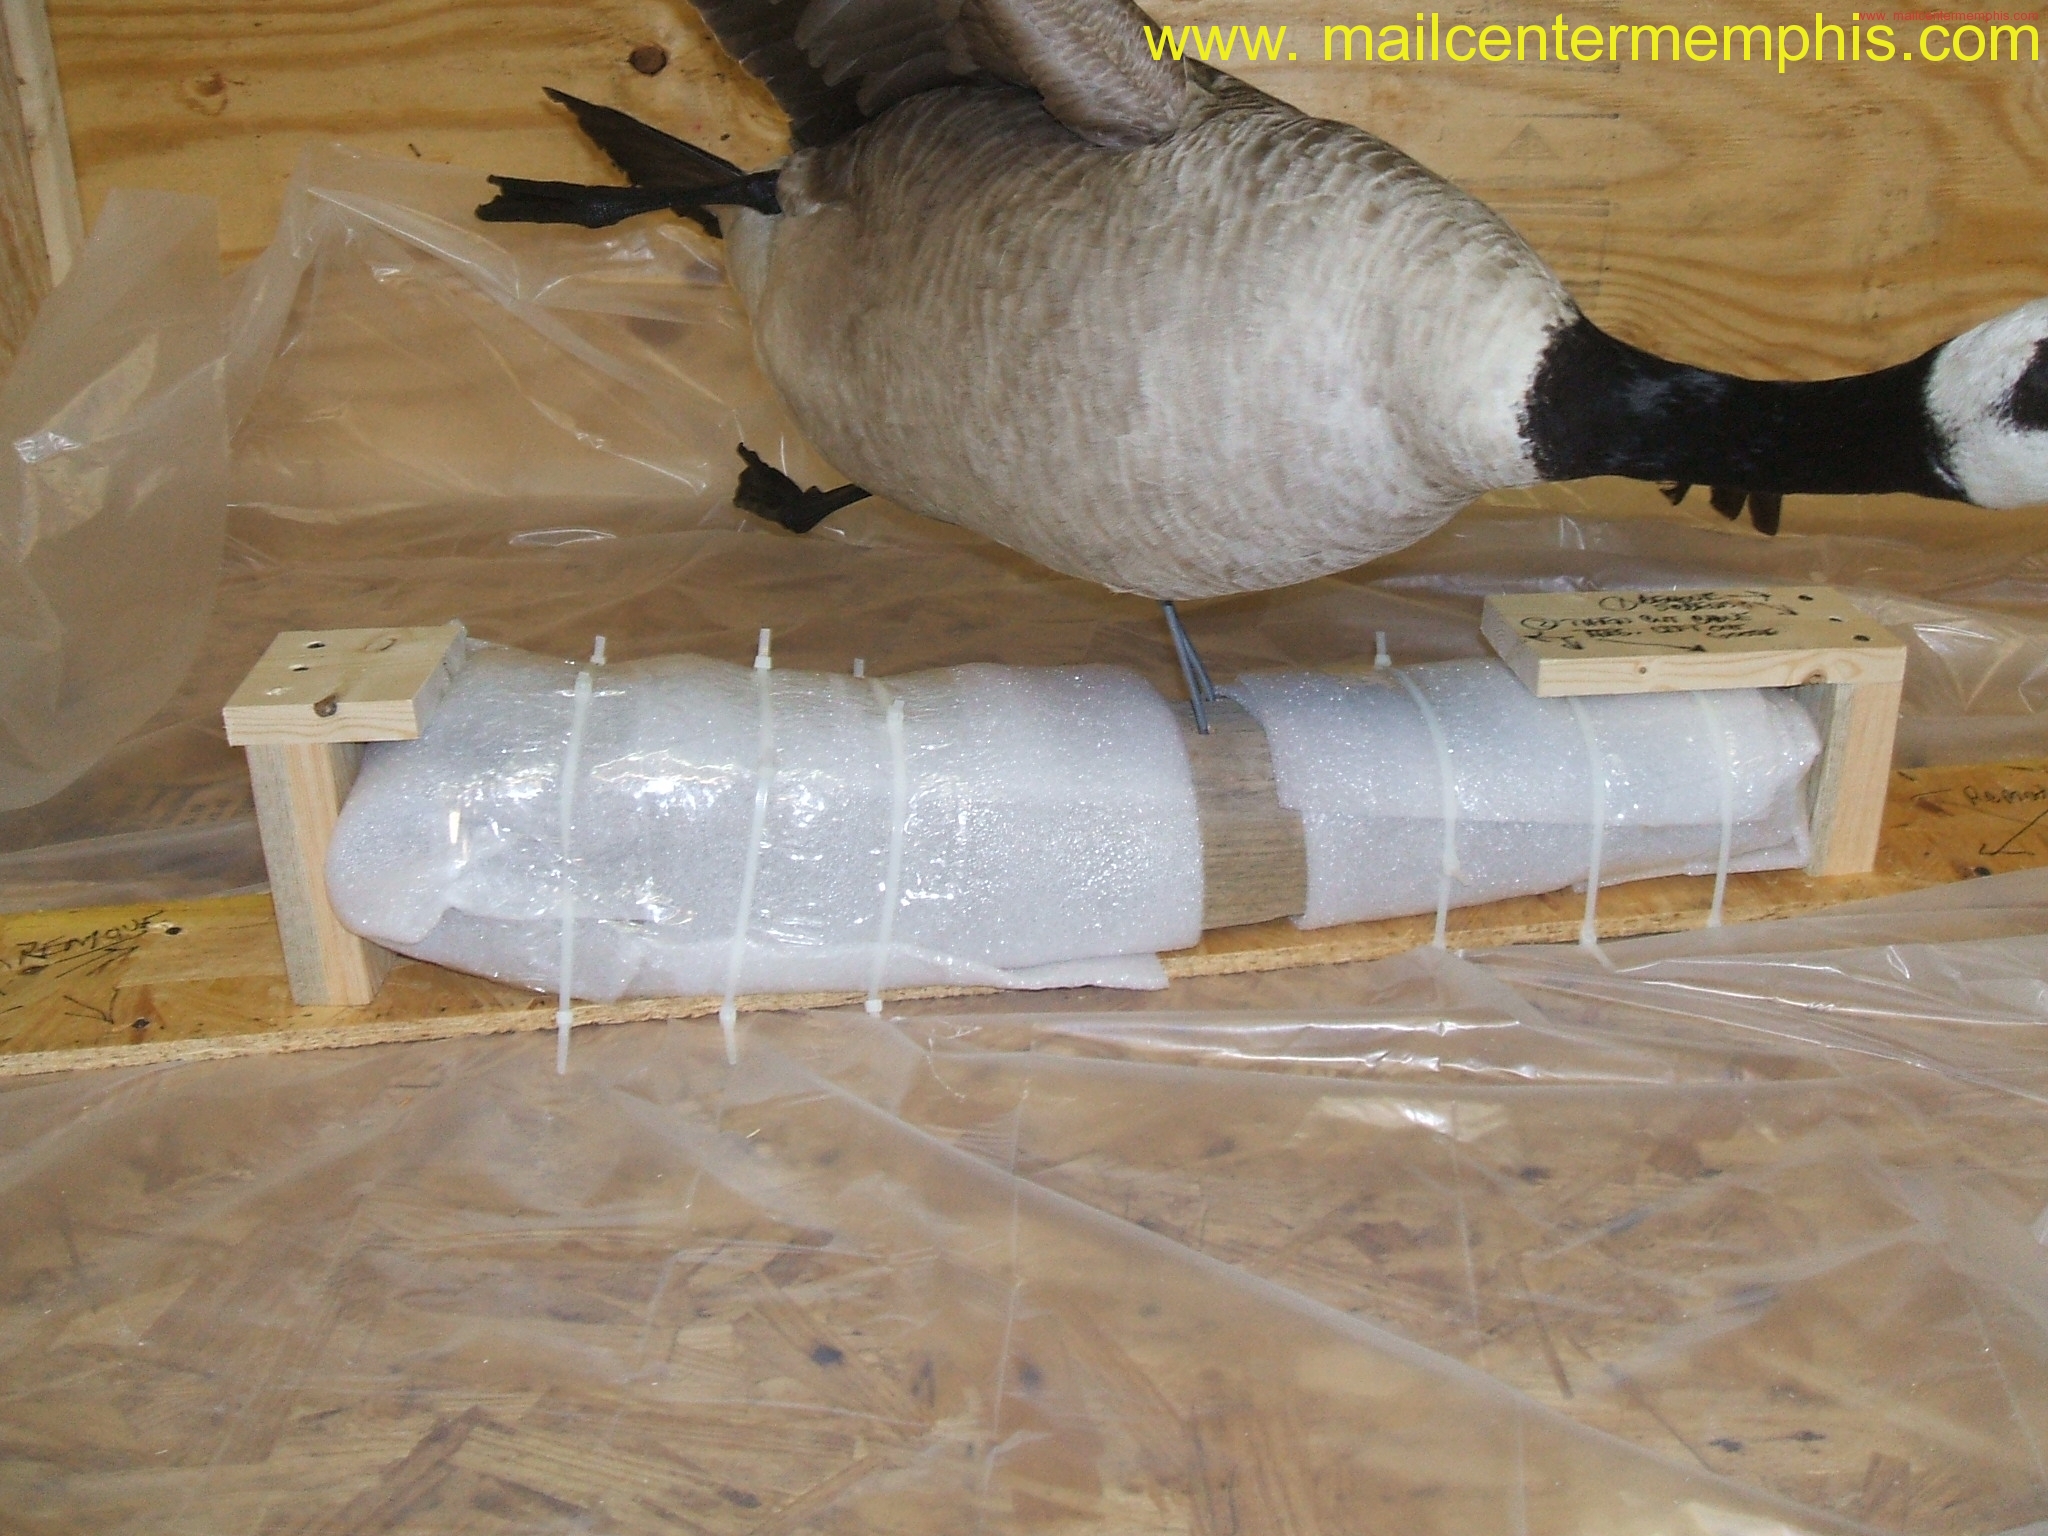 Goose attached to crate